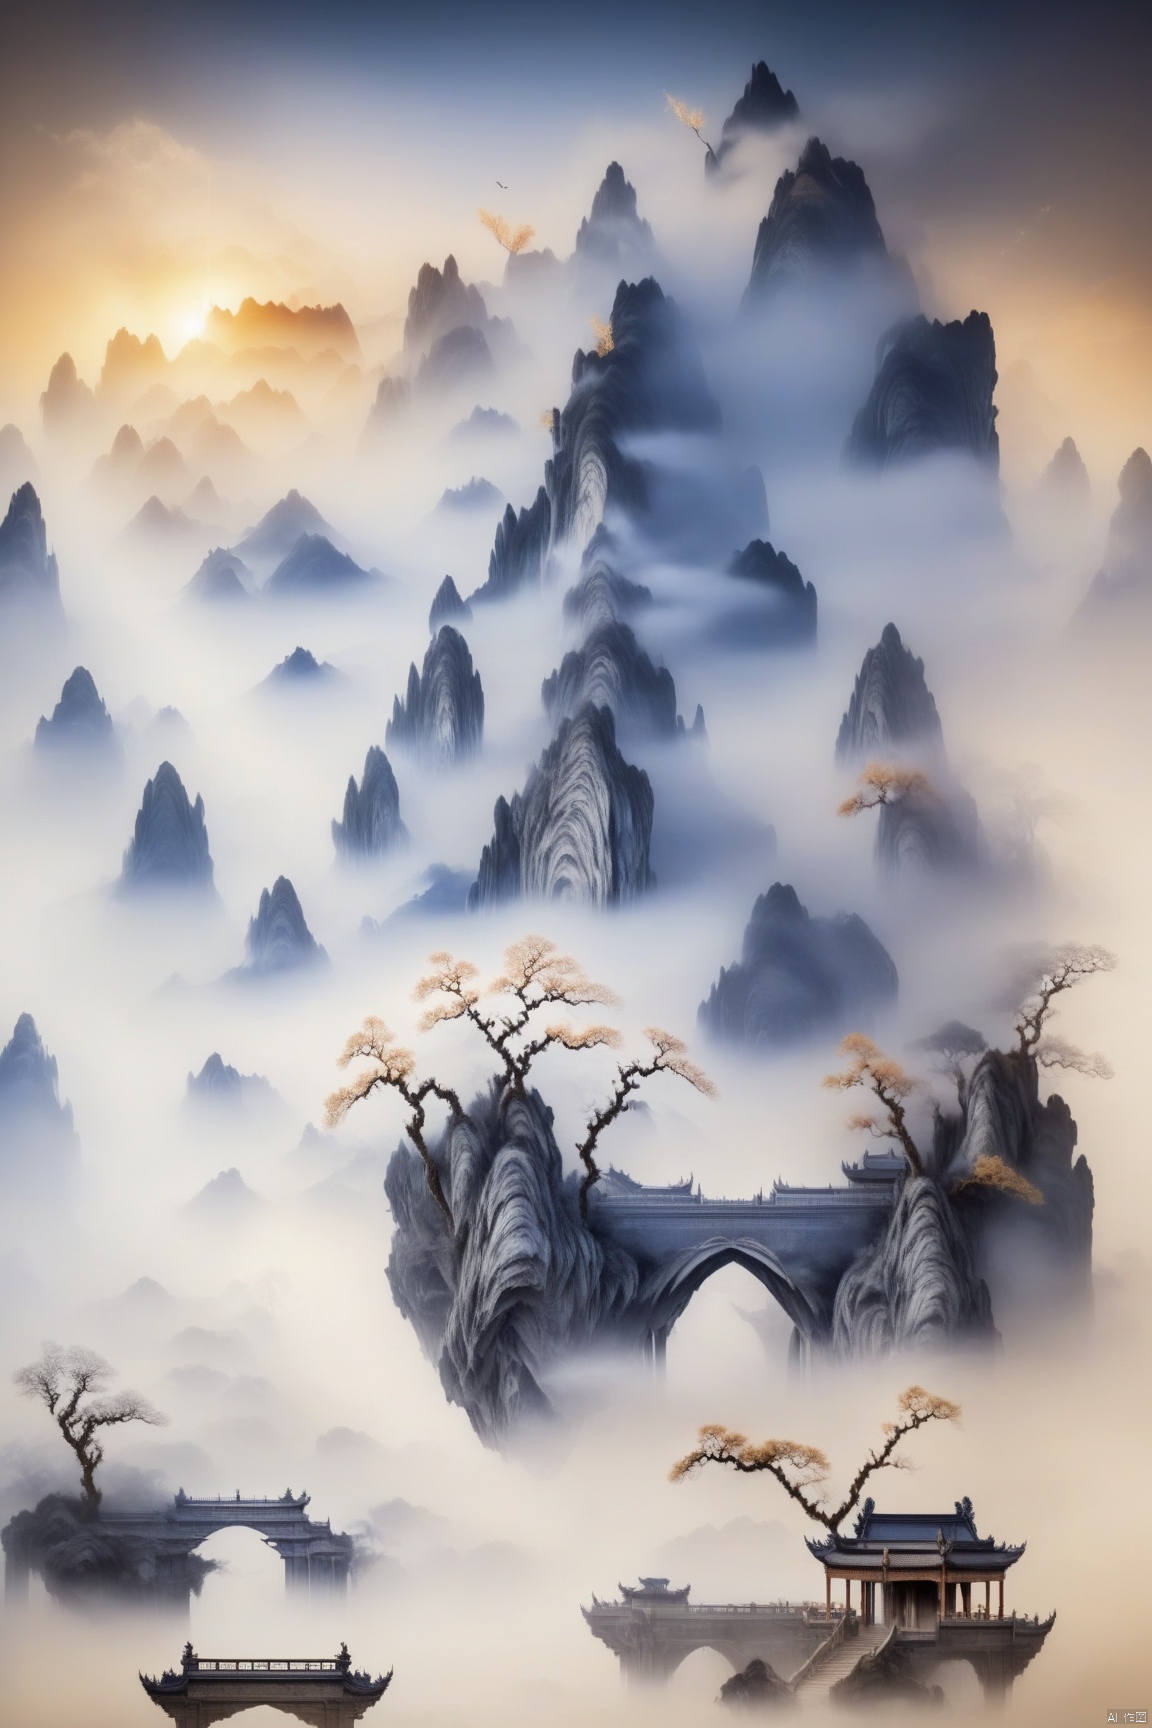 A mountain suspended in the air, with temples built on the peak, smoky, like a fairyland